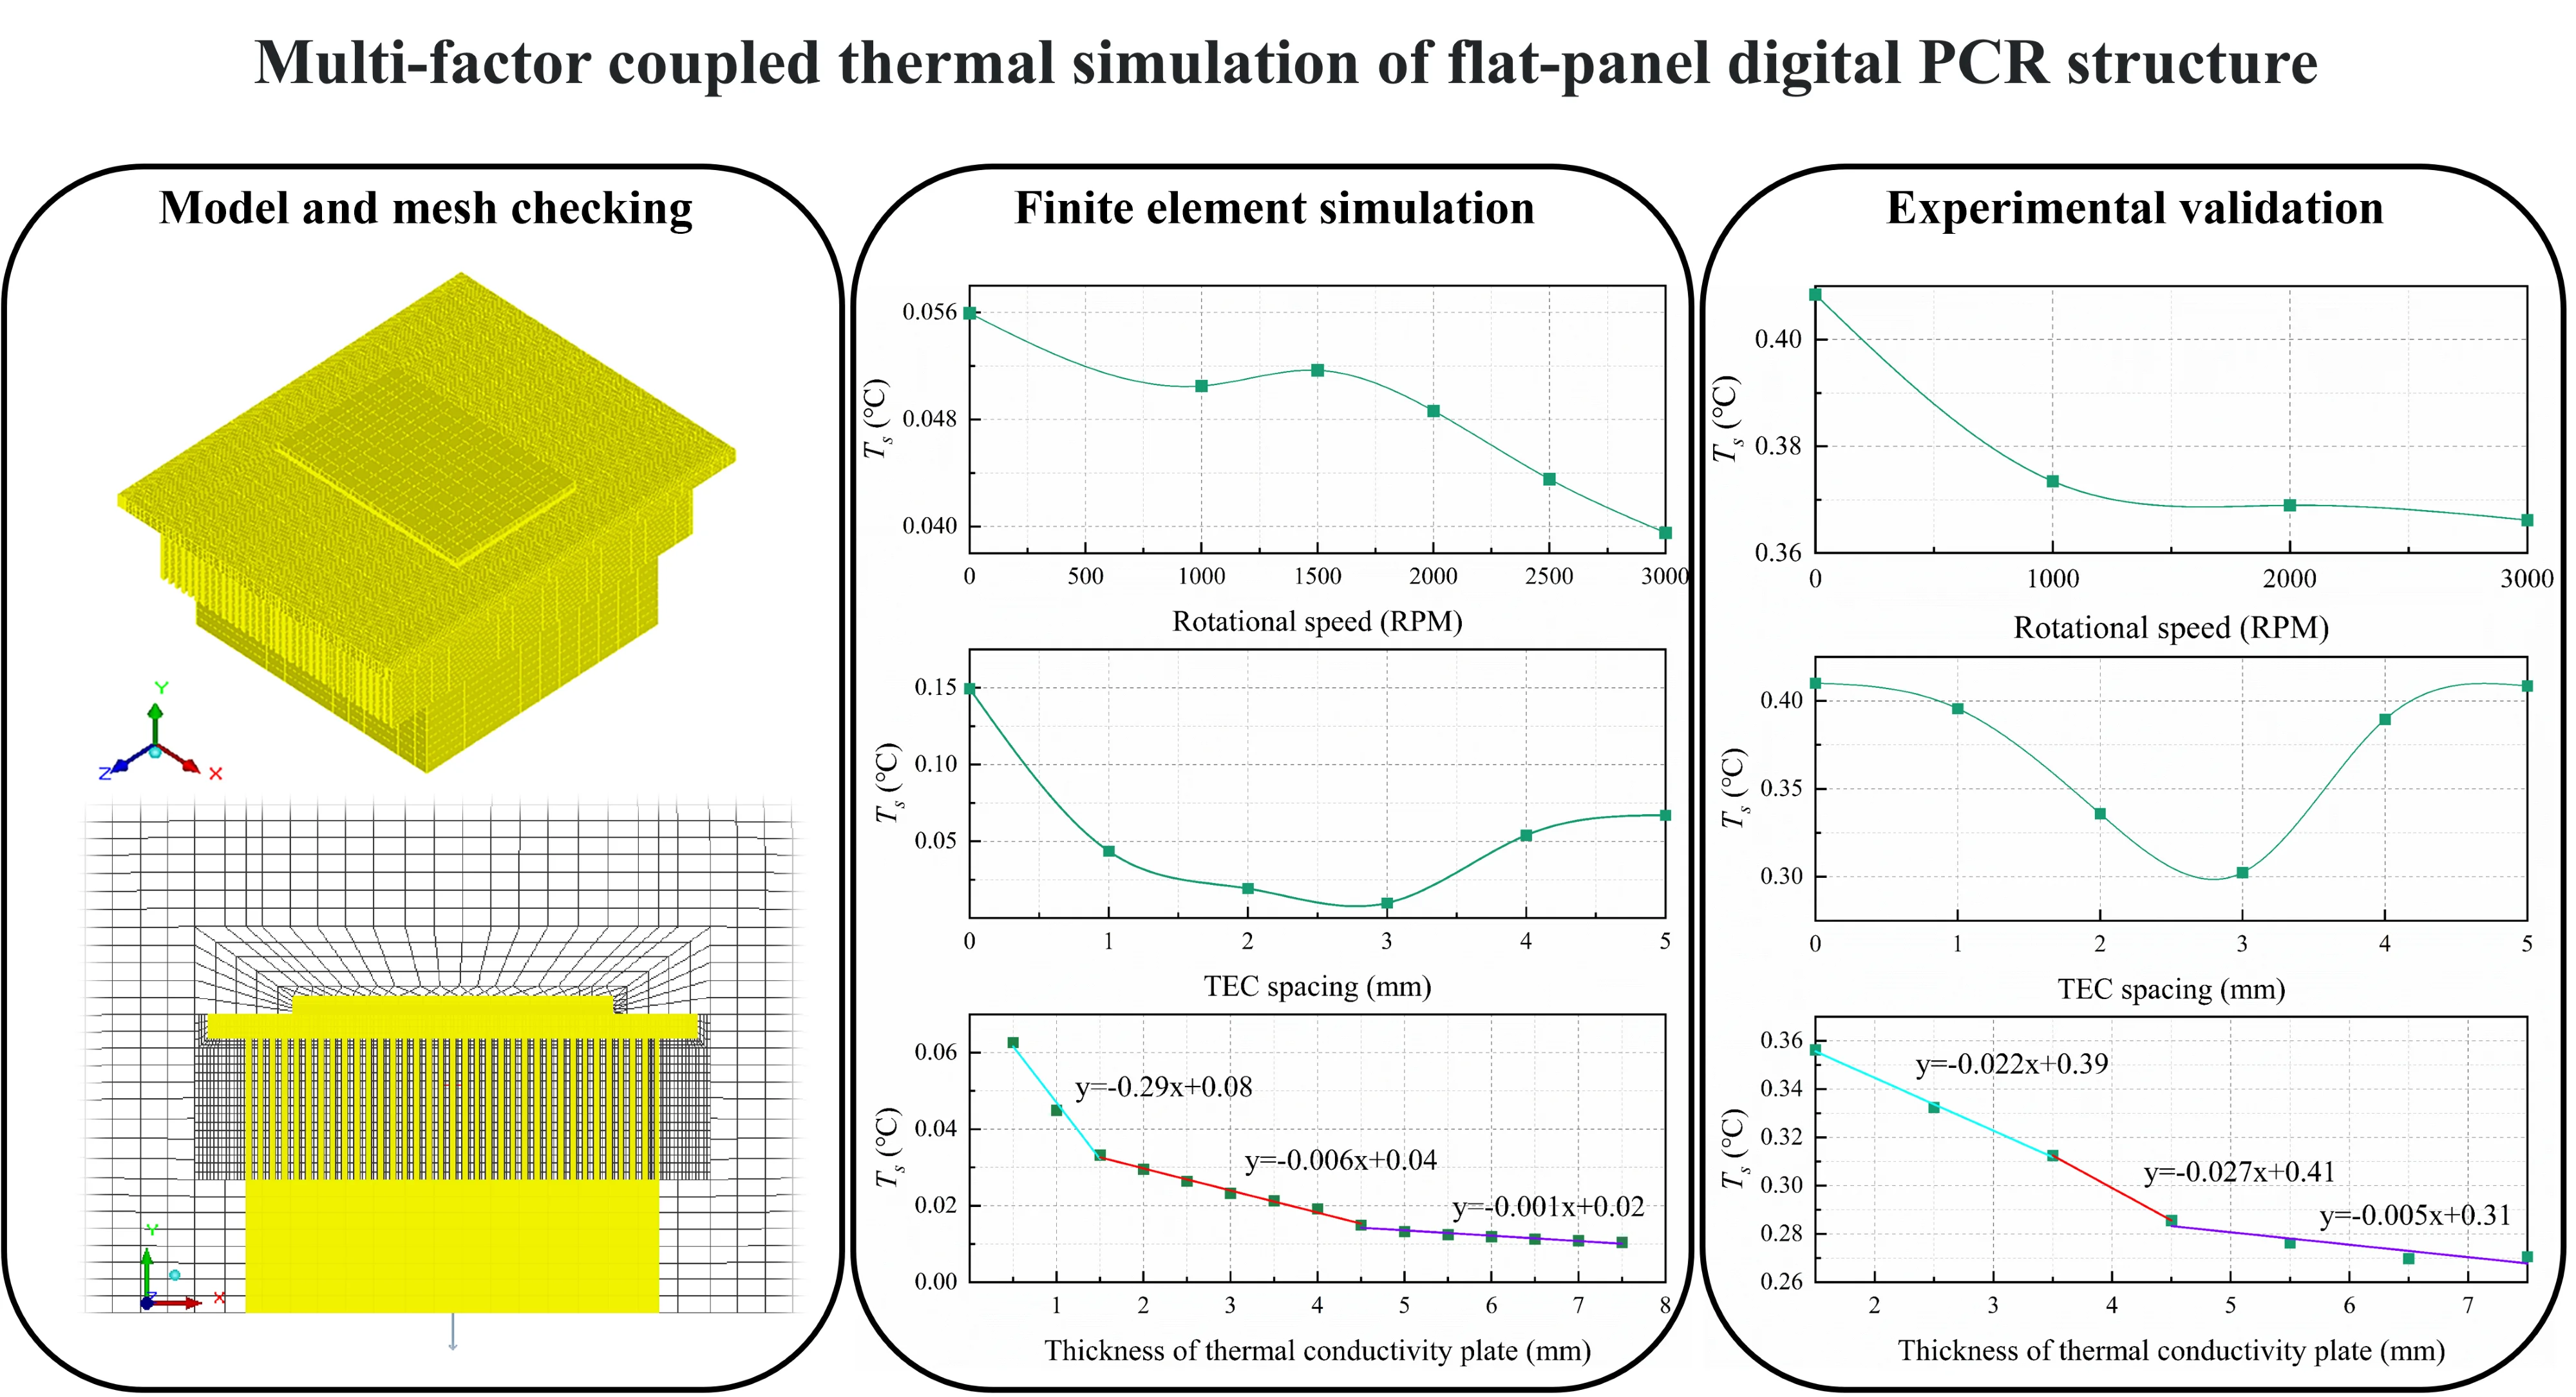 Multi-factor coupled thermal simulation of flat-panel digital PCR structure